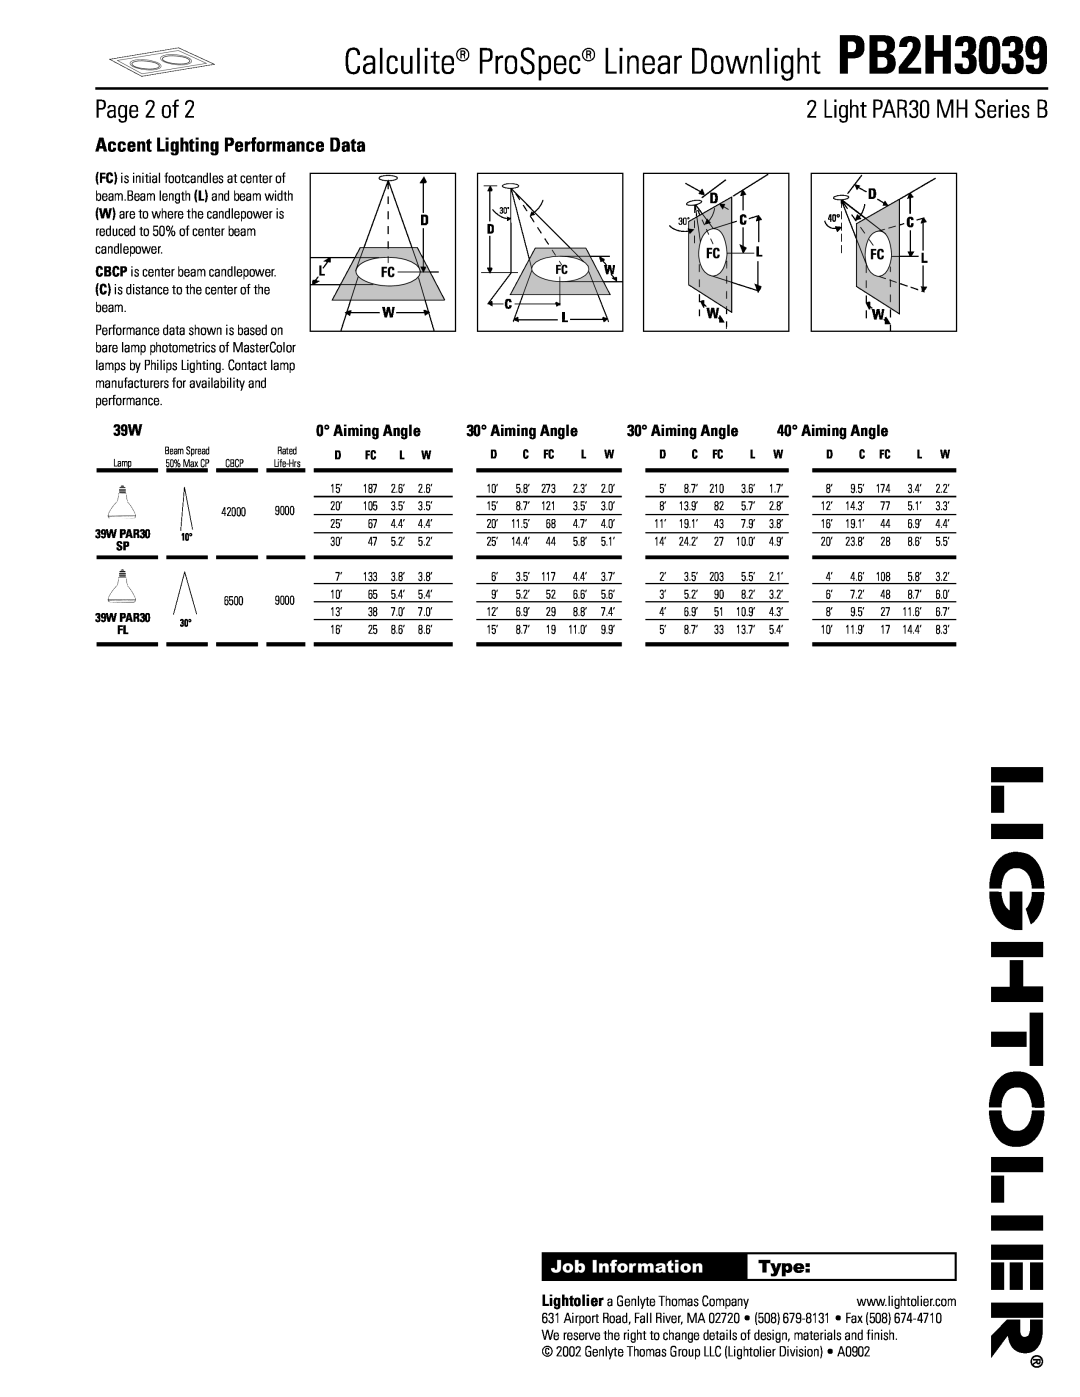 Lightolier Page 2 of, Accent Lighting Performance Data, Aiming Angle, Calculite ProSpec Linear Downlight PB2H3039, Type 